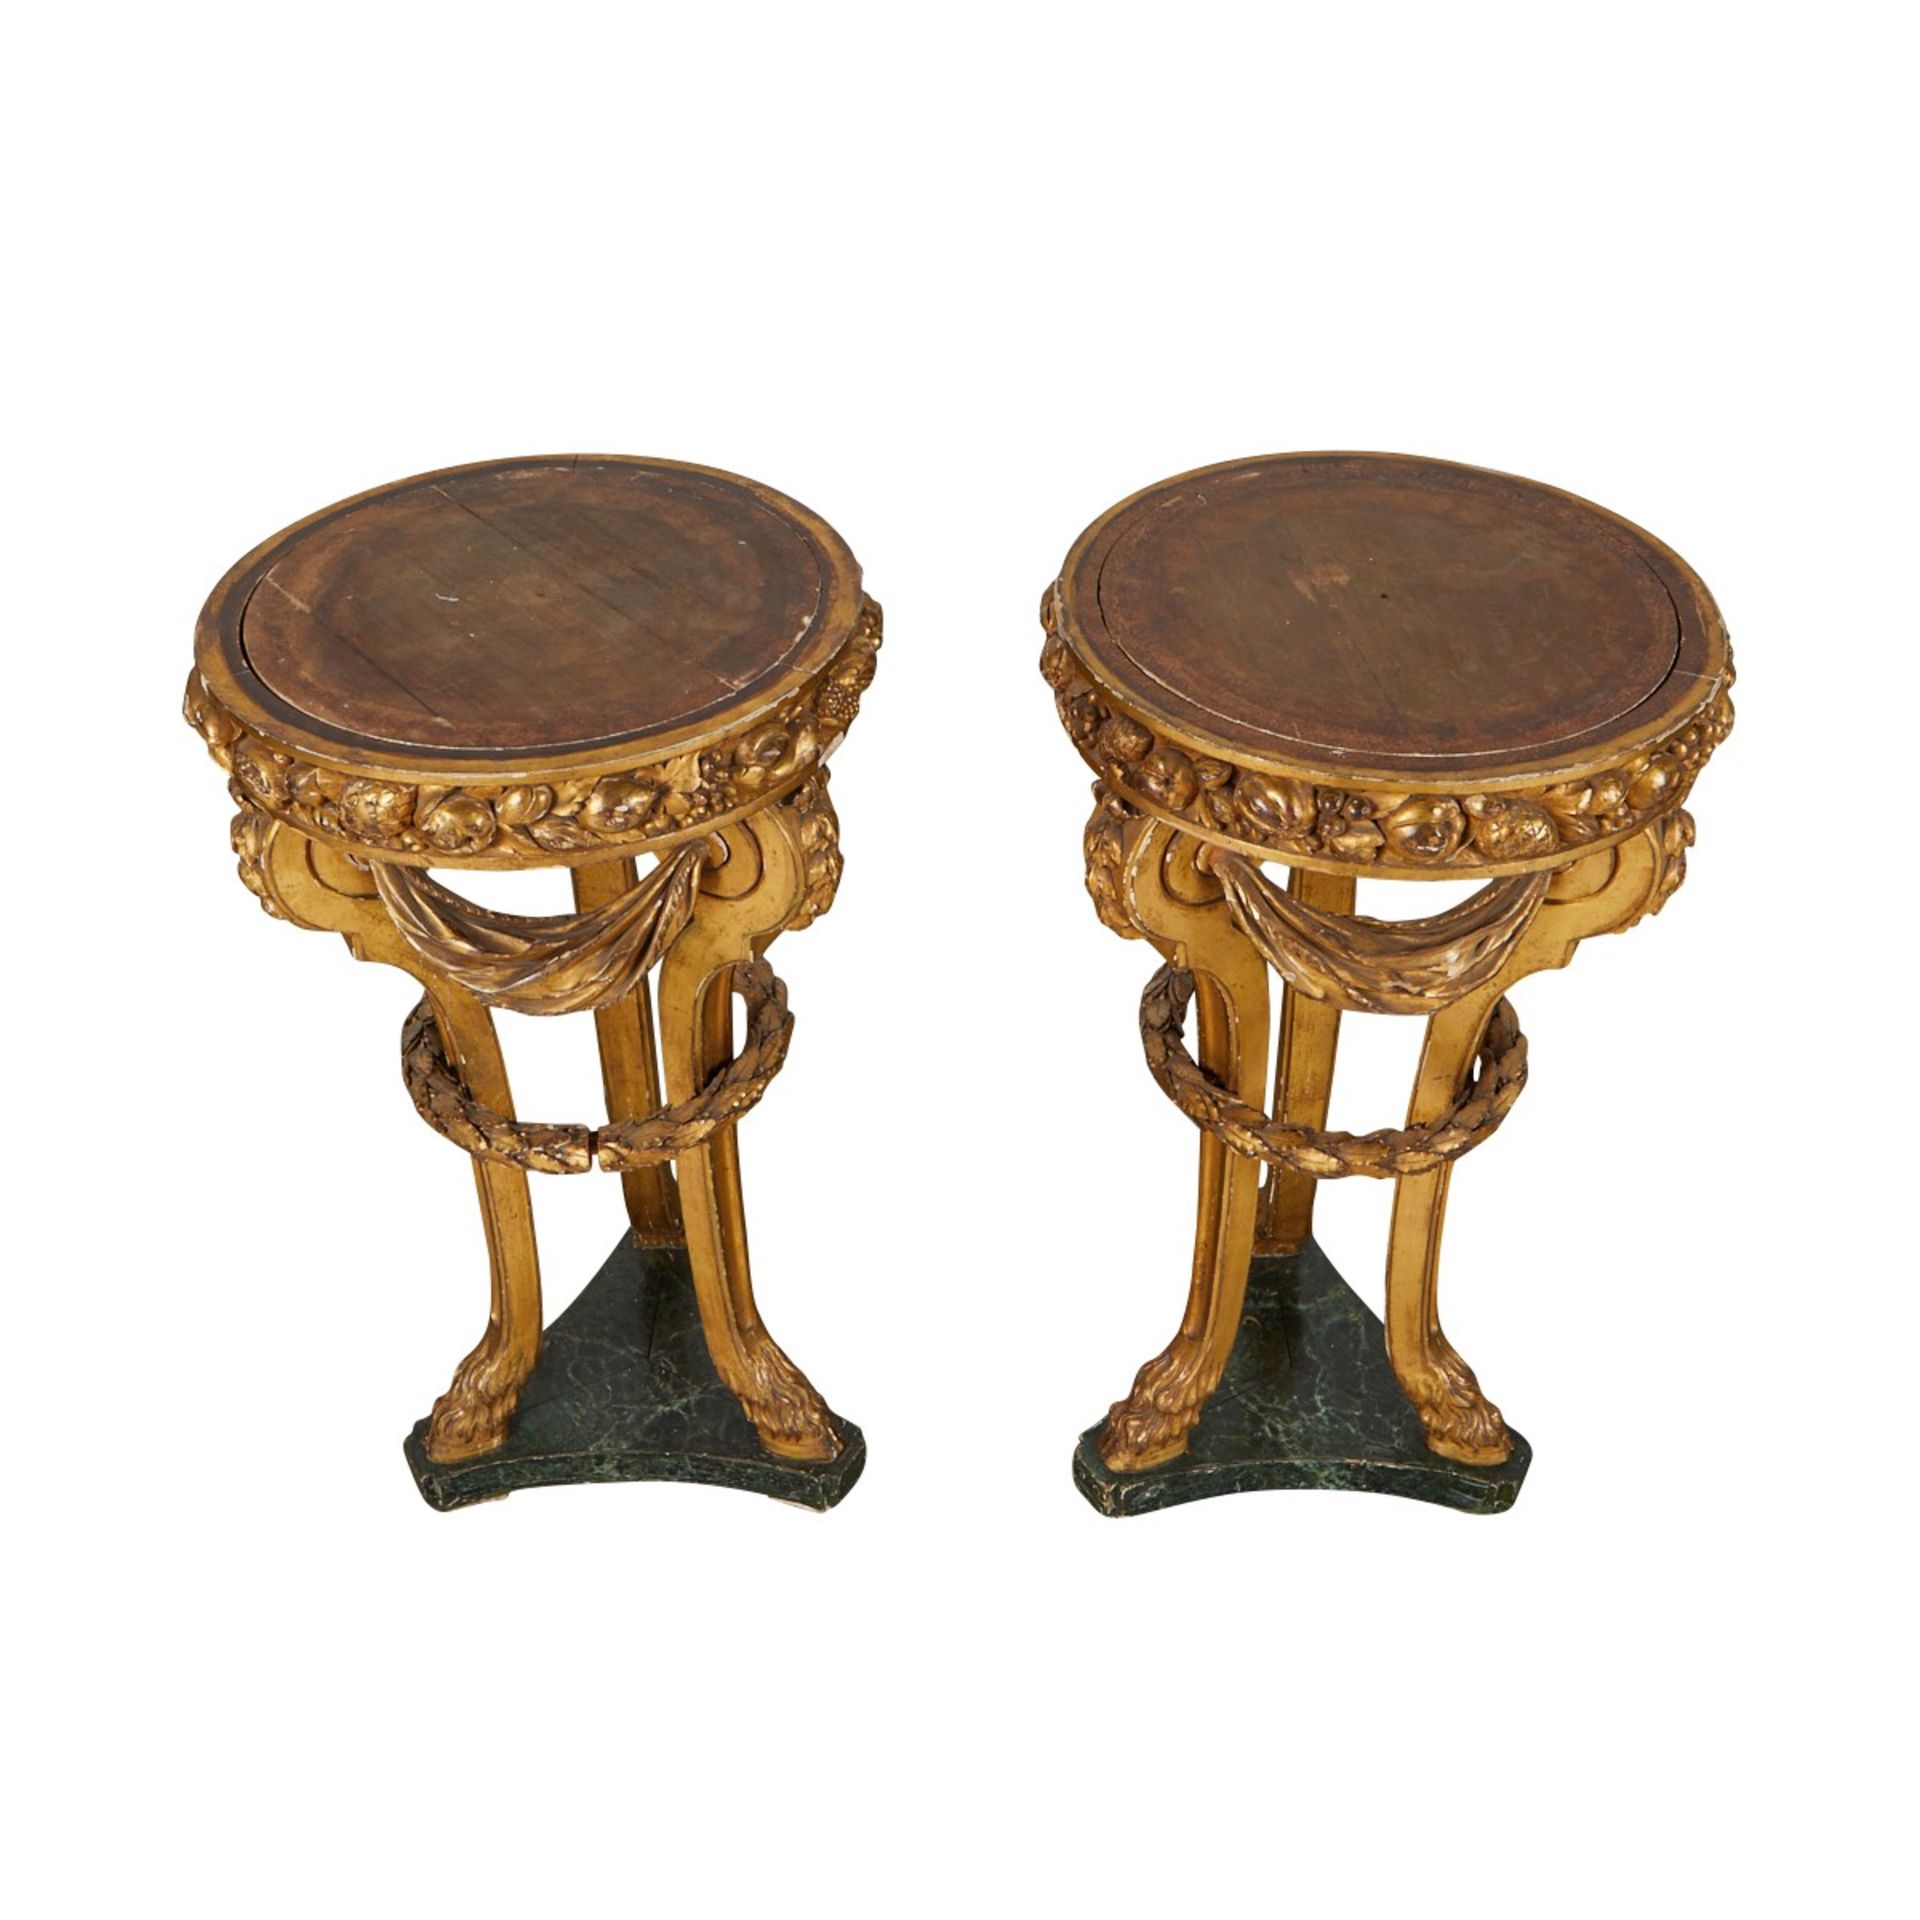 Pair Neoclassical Giltwood Faux Marble Pedestals - Image 7 of 17